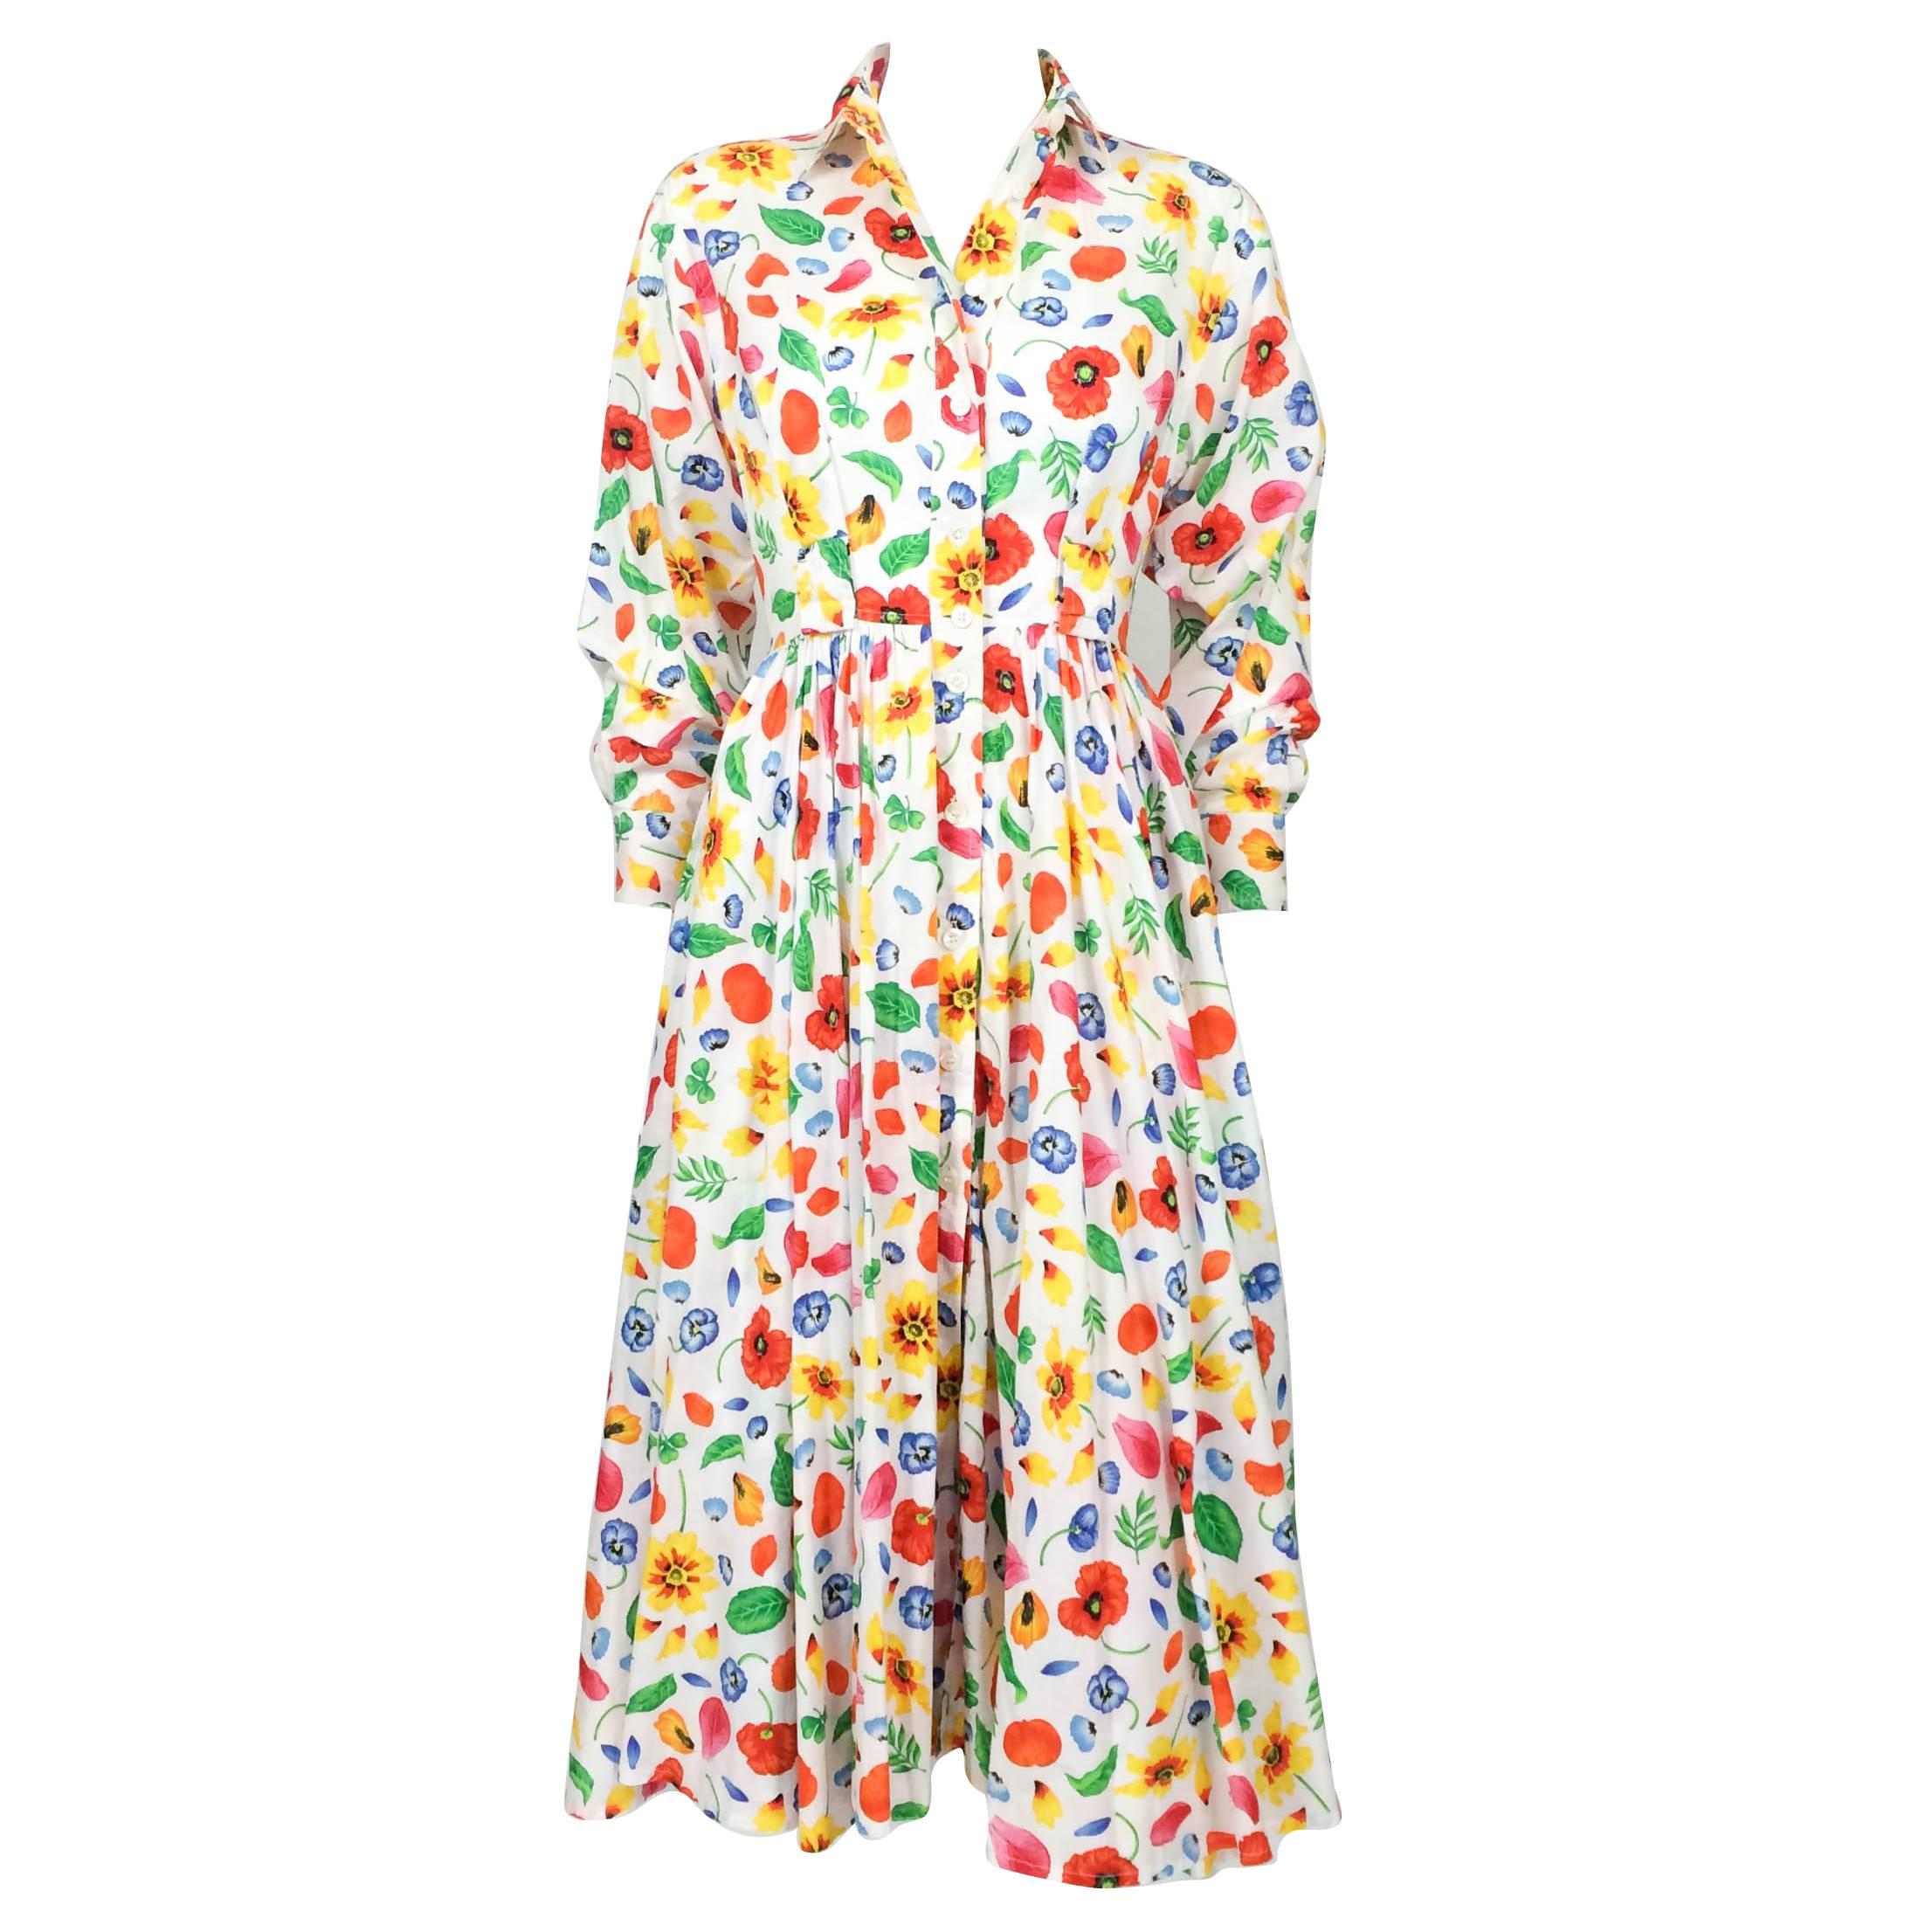 Kenzo Floral Shirt Dress - 1970s / 1980s For Sale